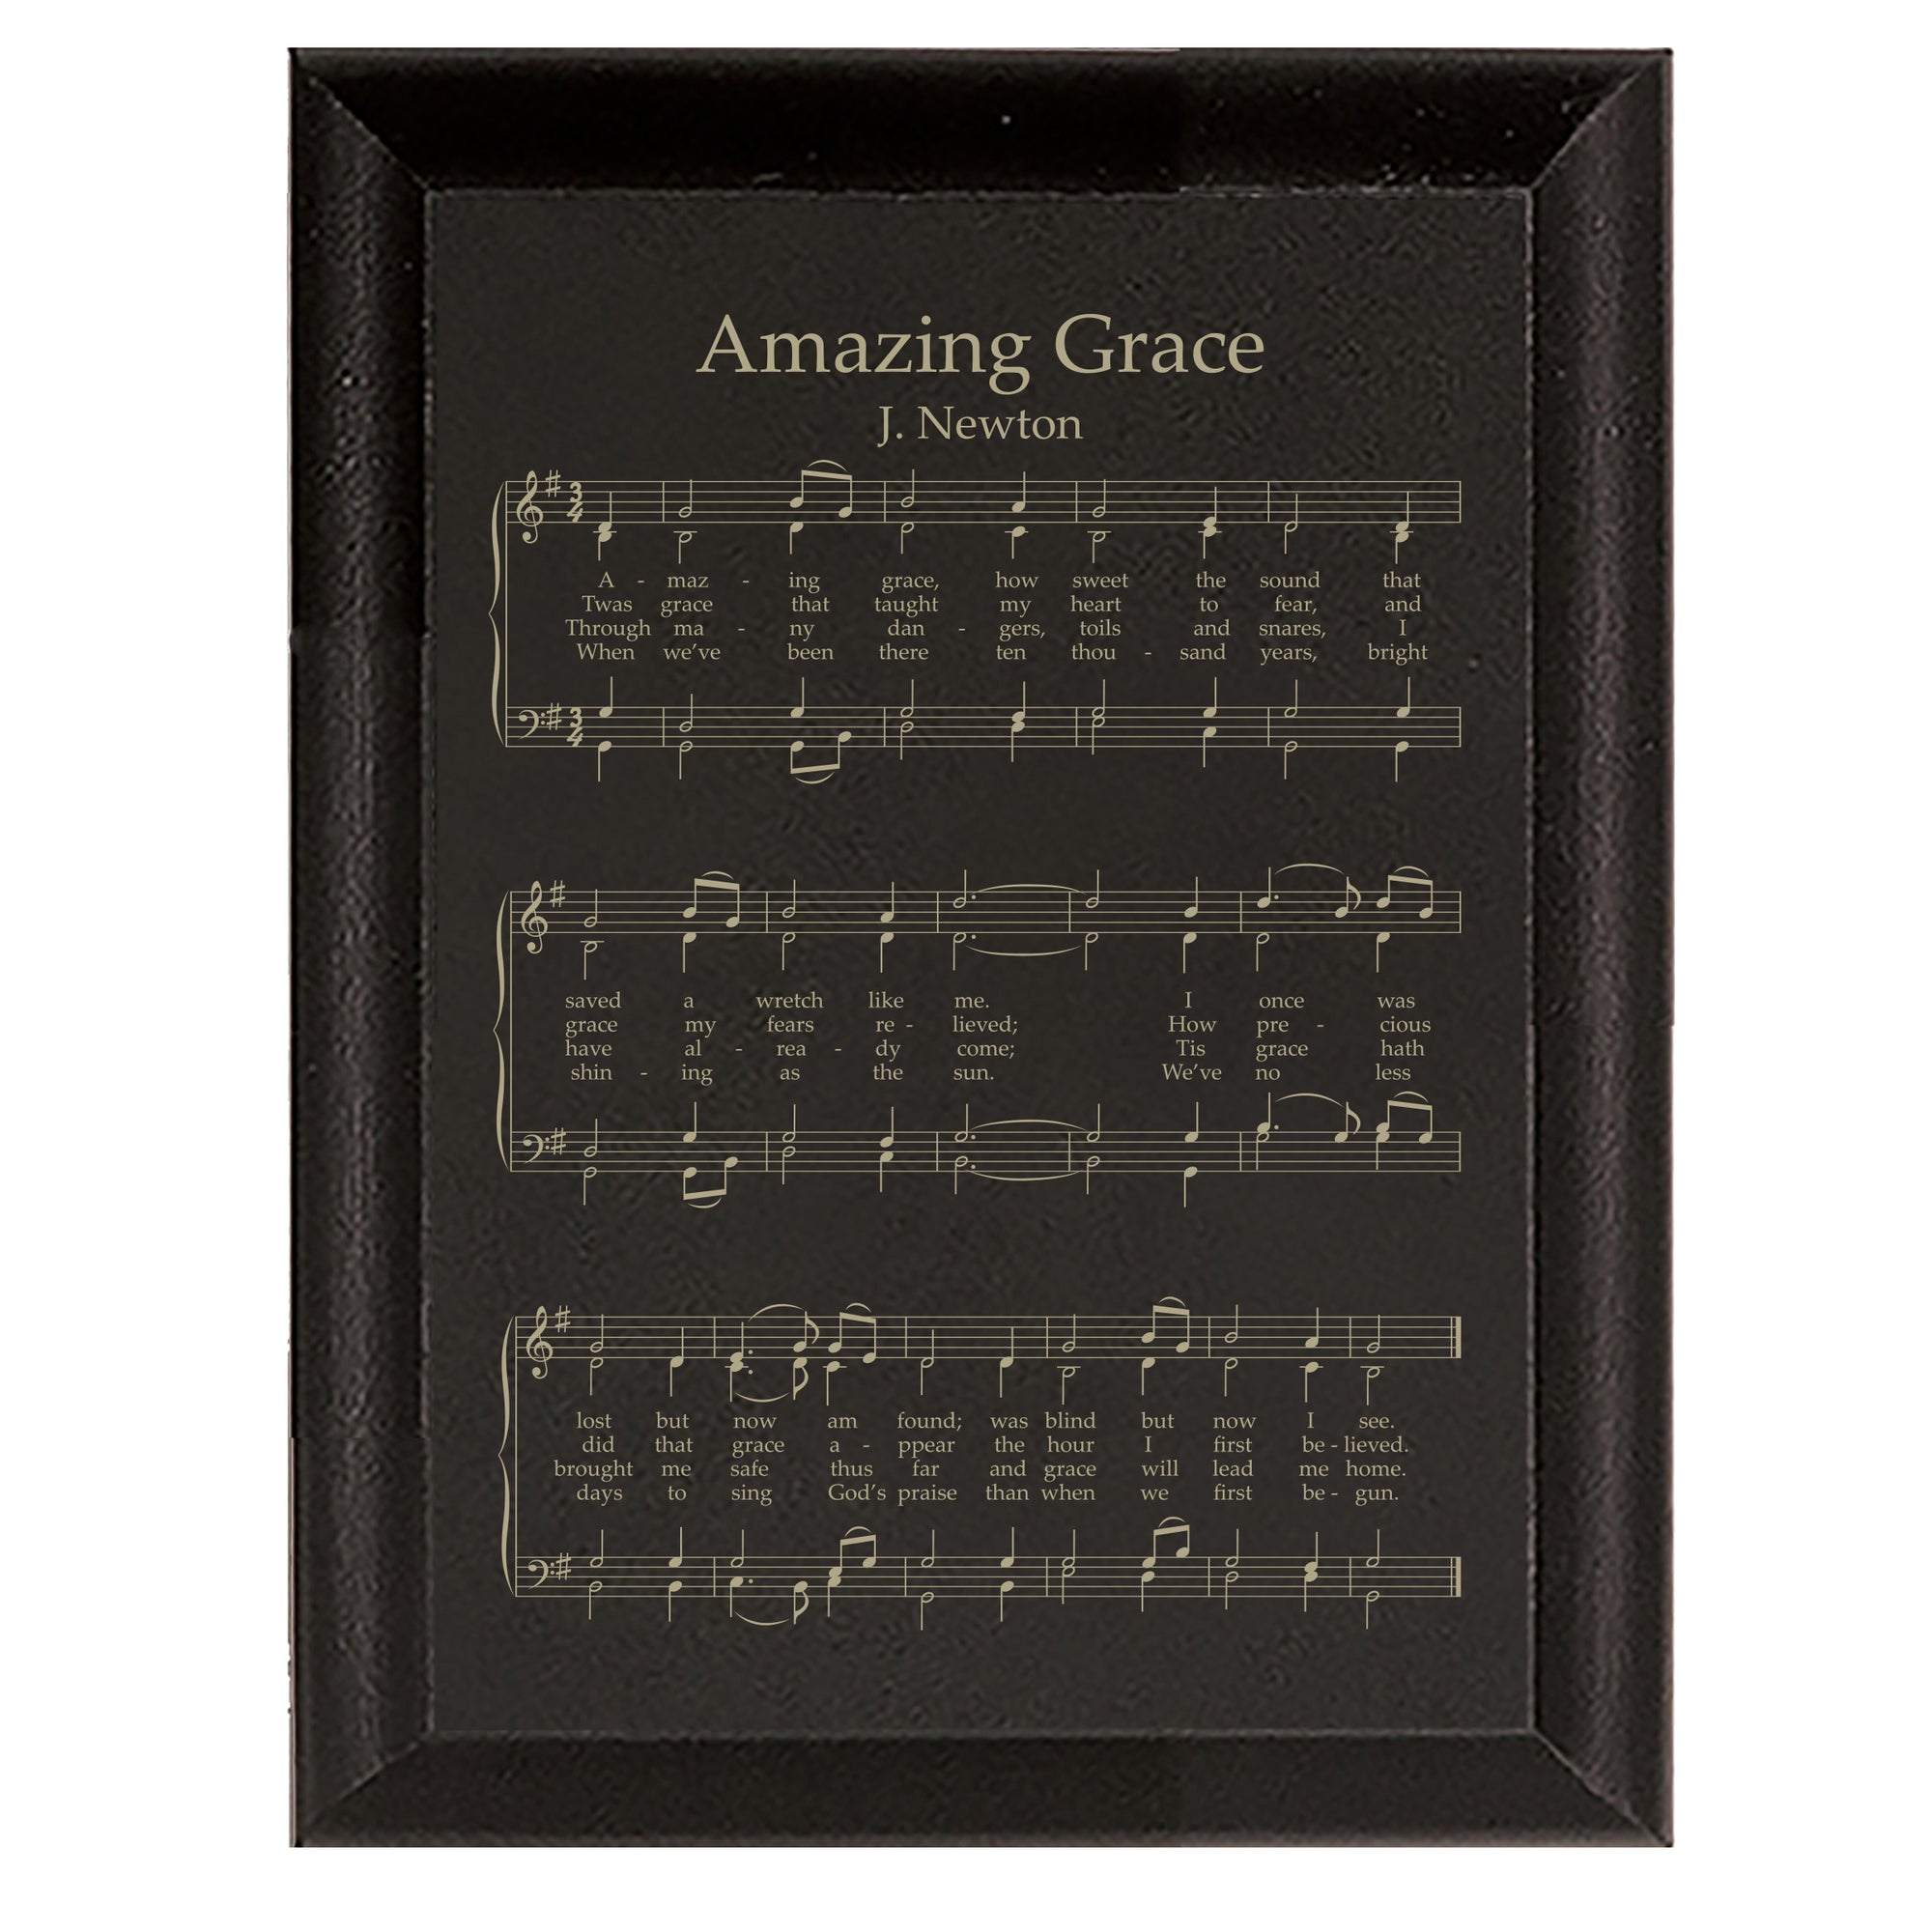 Lifesong Milestones Sheet Music Wall Art Plaque Gifts With Heavenly Hymn and Song Lyrics -  9” x 12” Decorative Wooden Hanging Sign